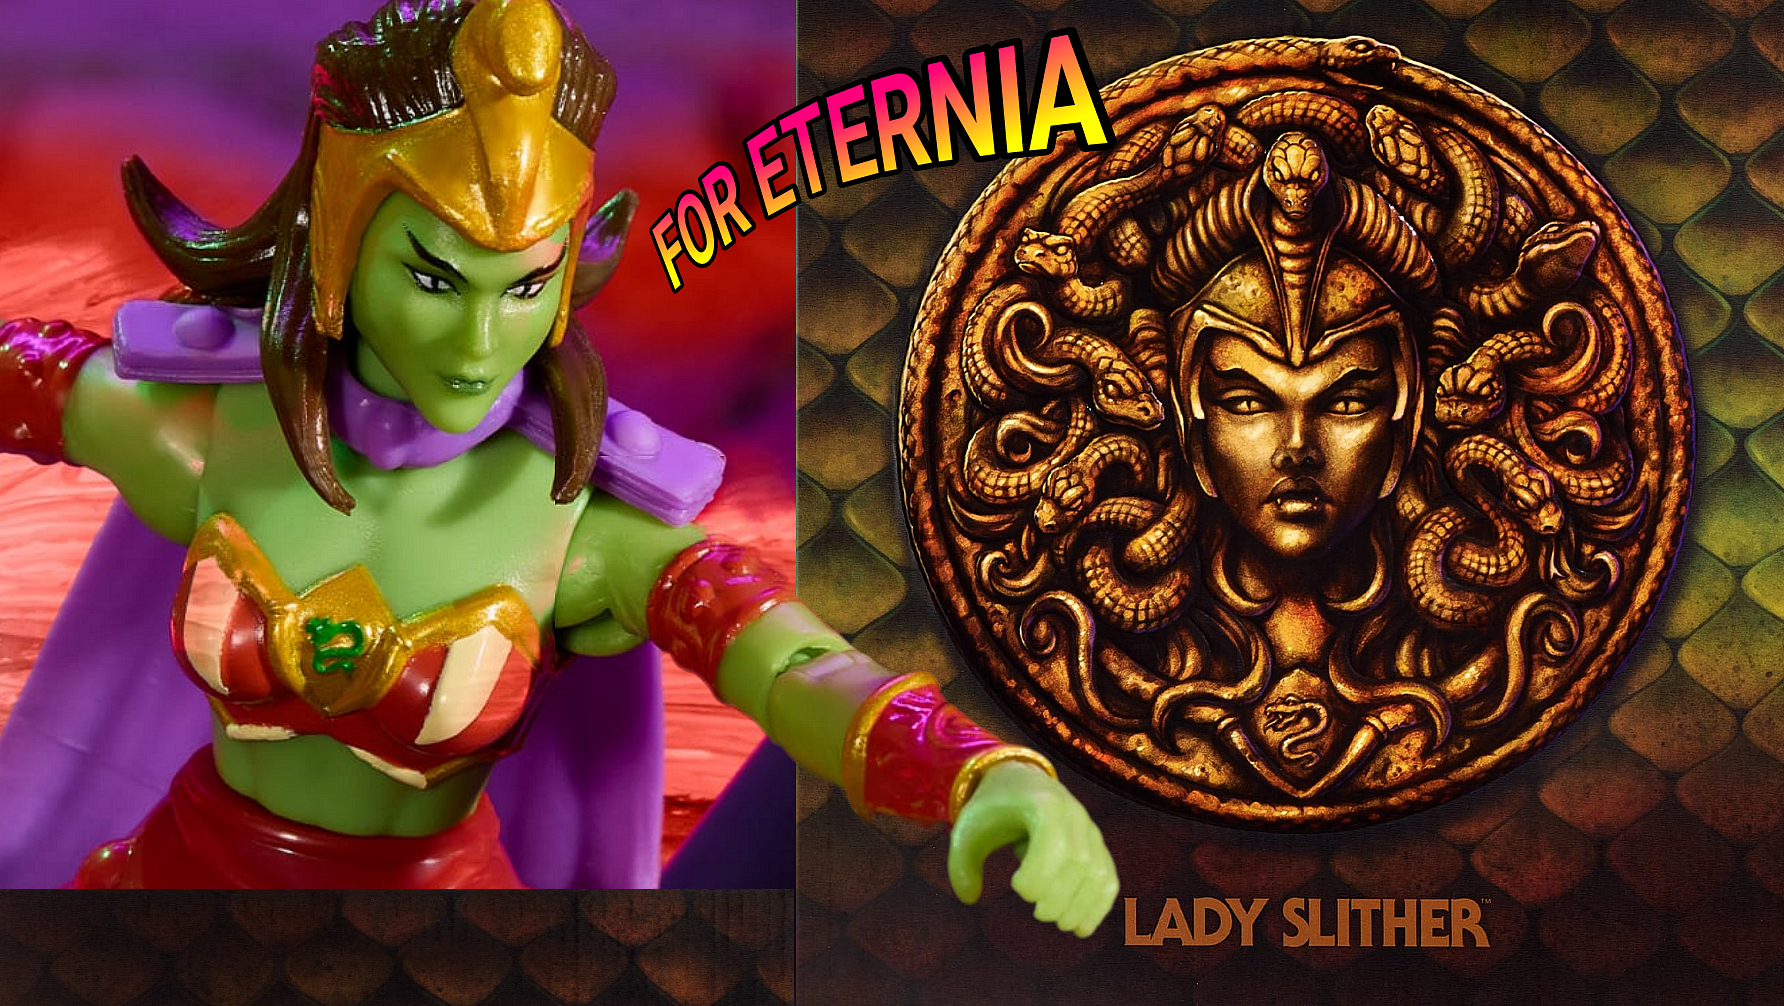 Pre-Orders for Masters of the Universe Origins Lady Slither Figure go live September 12th